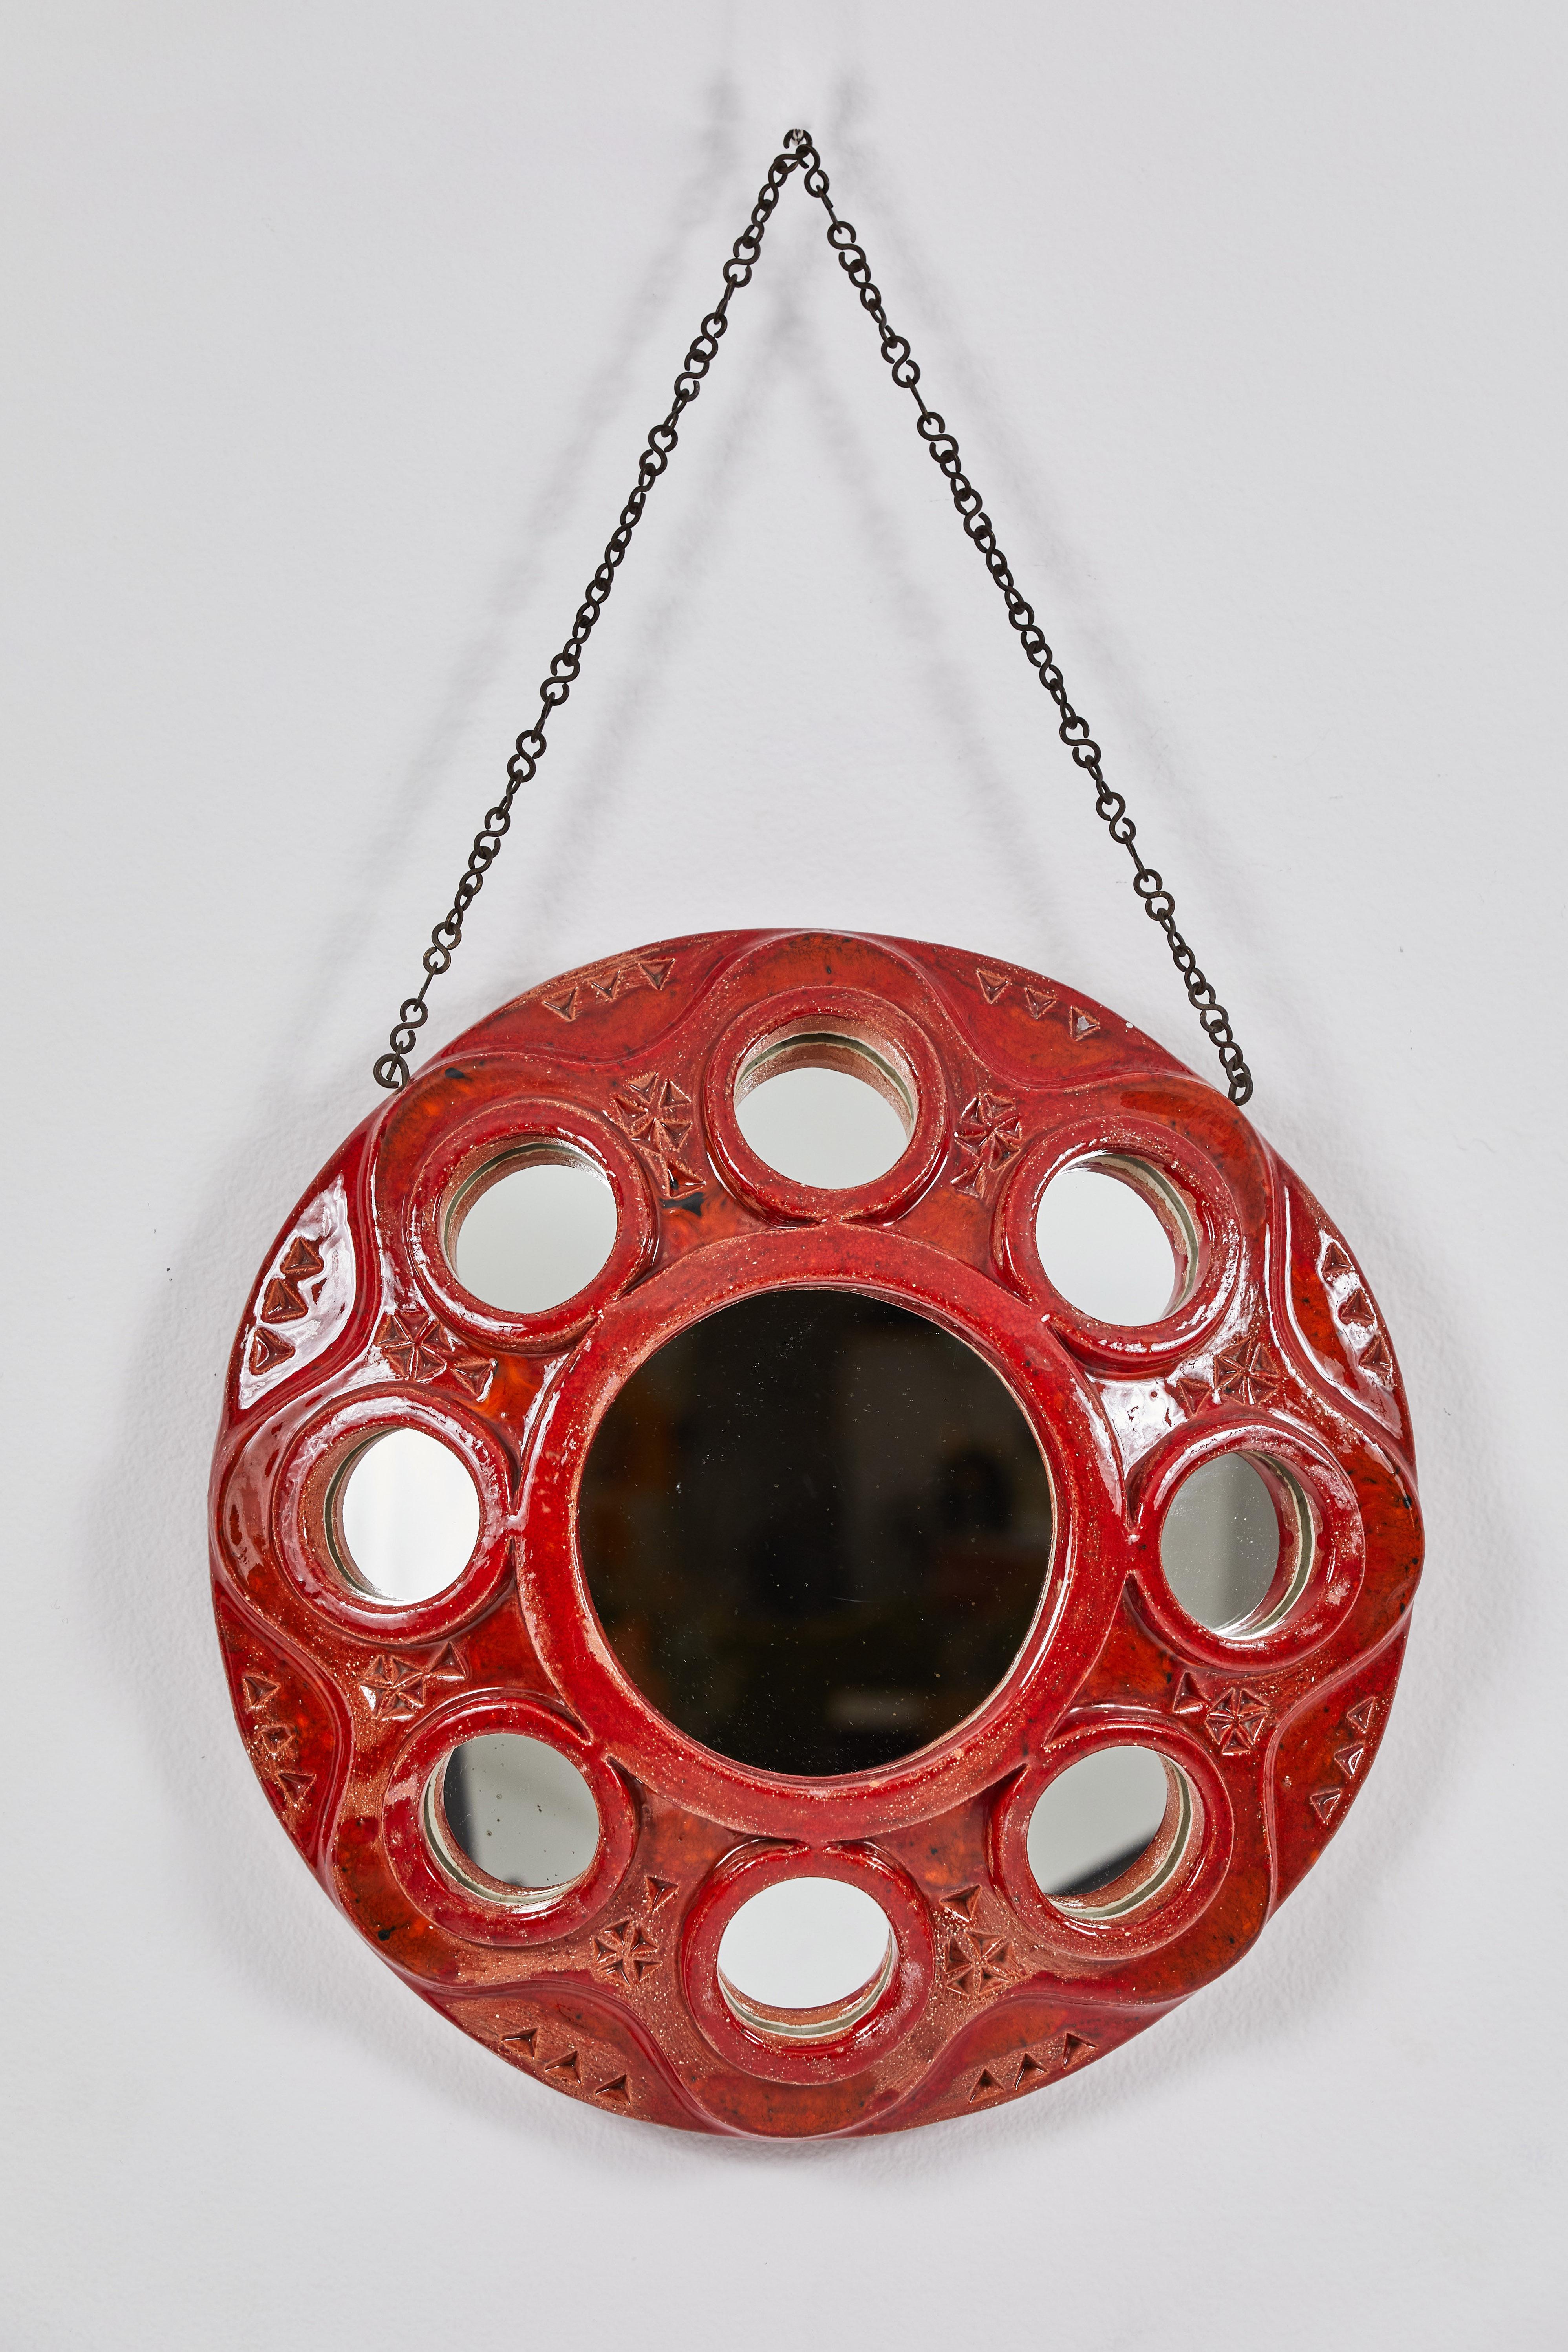 This is a very unique French Clay mirror in a striking red glaze. It features one center mirror measuring 7